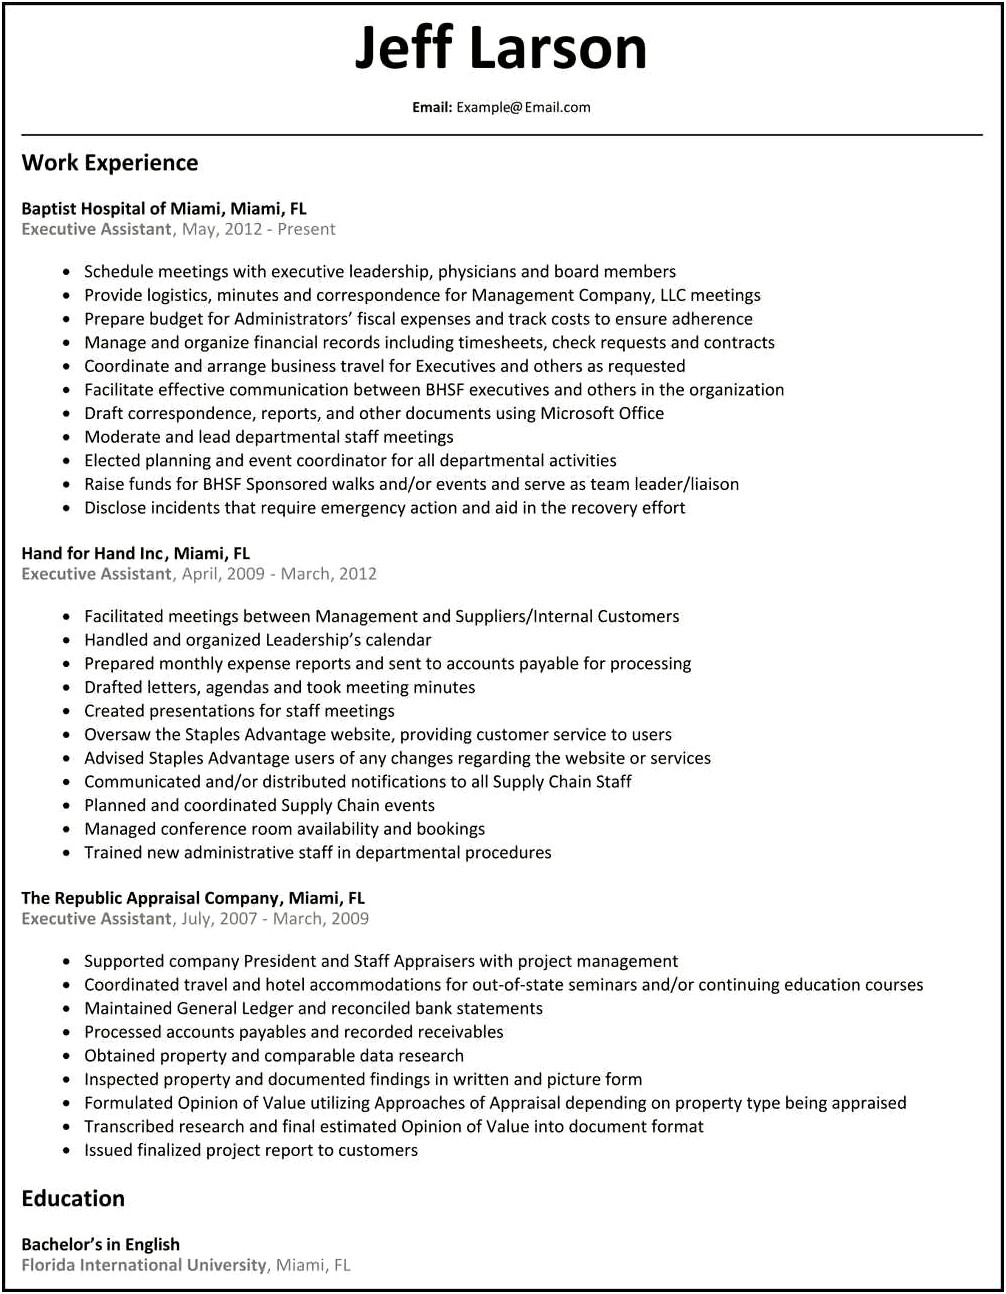 Resume Examples For High School Basketball